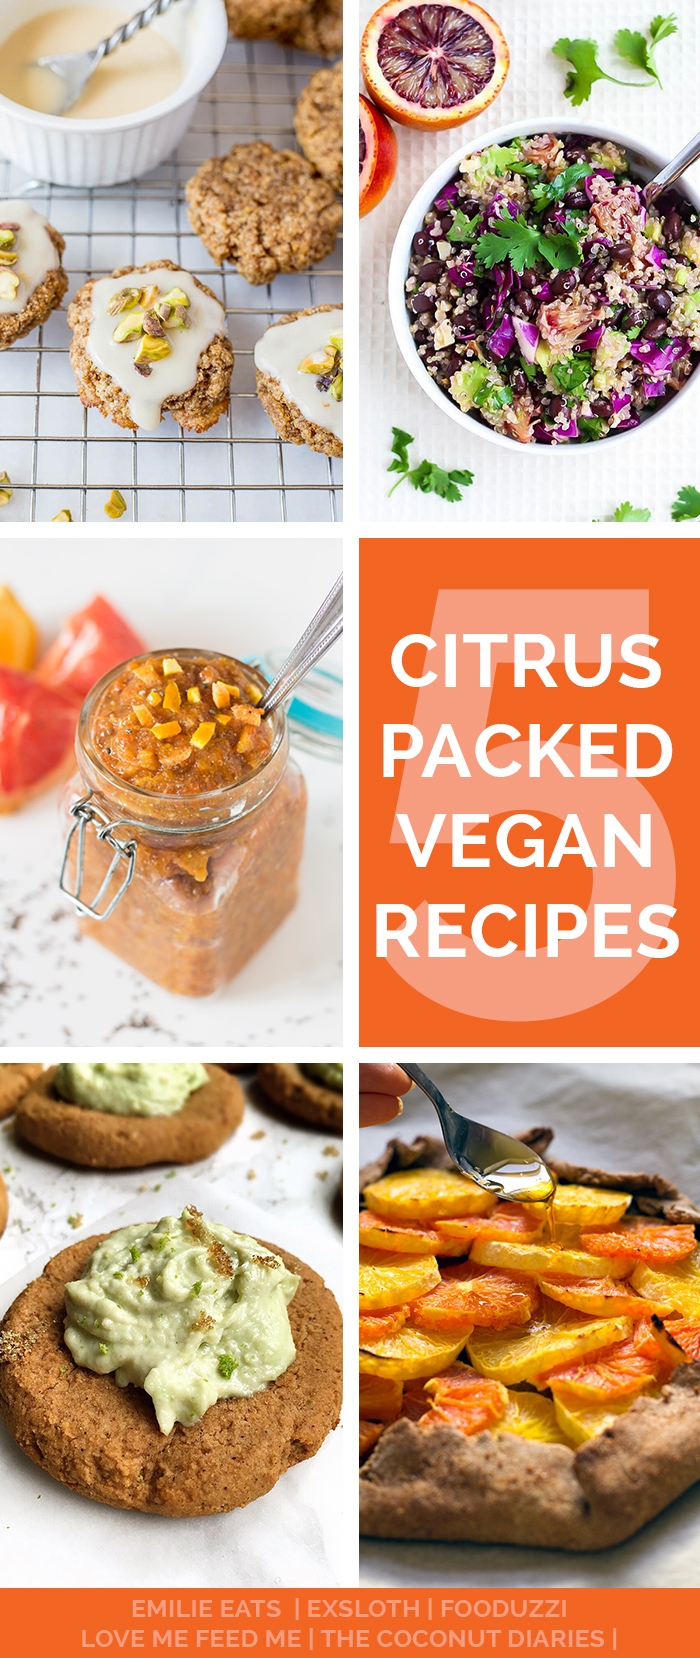 These 5 citrus packed vegan recipes are the perfect way to use up all those fresh citrus fruits this spring!